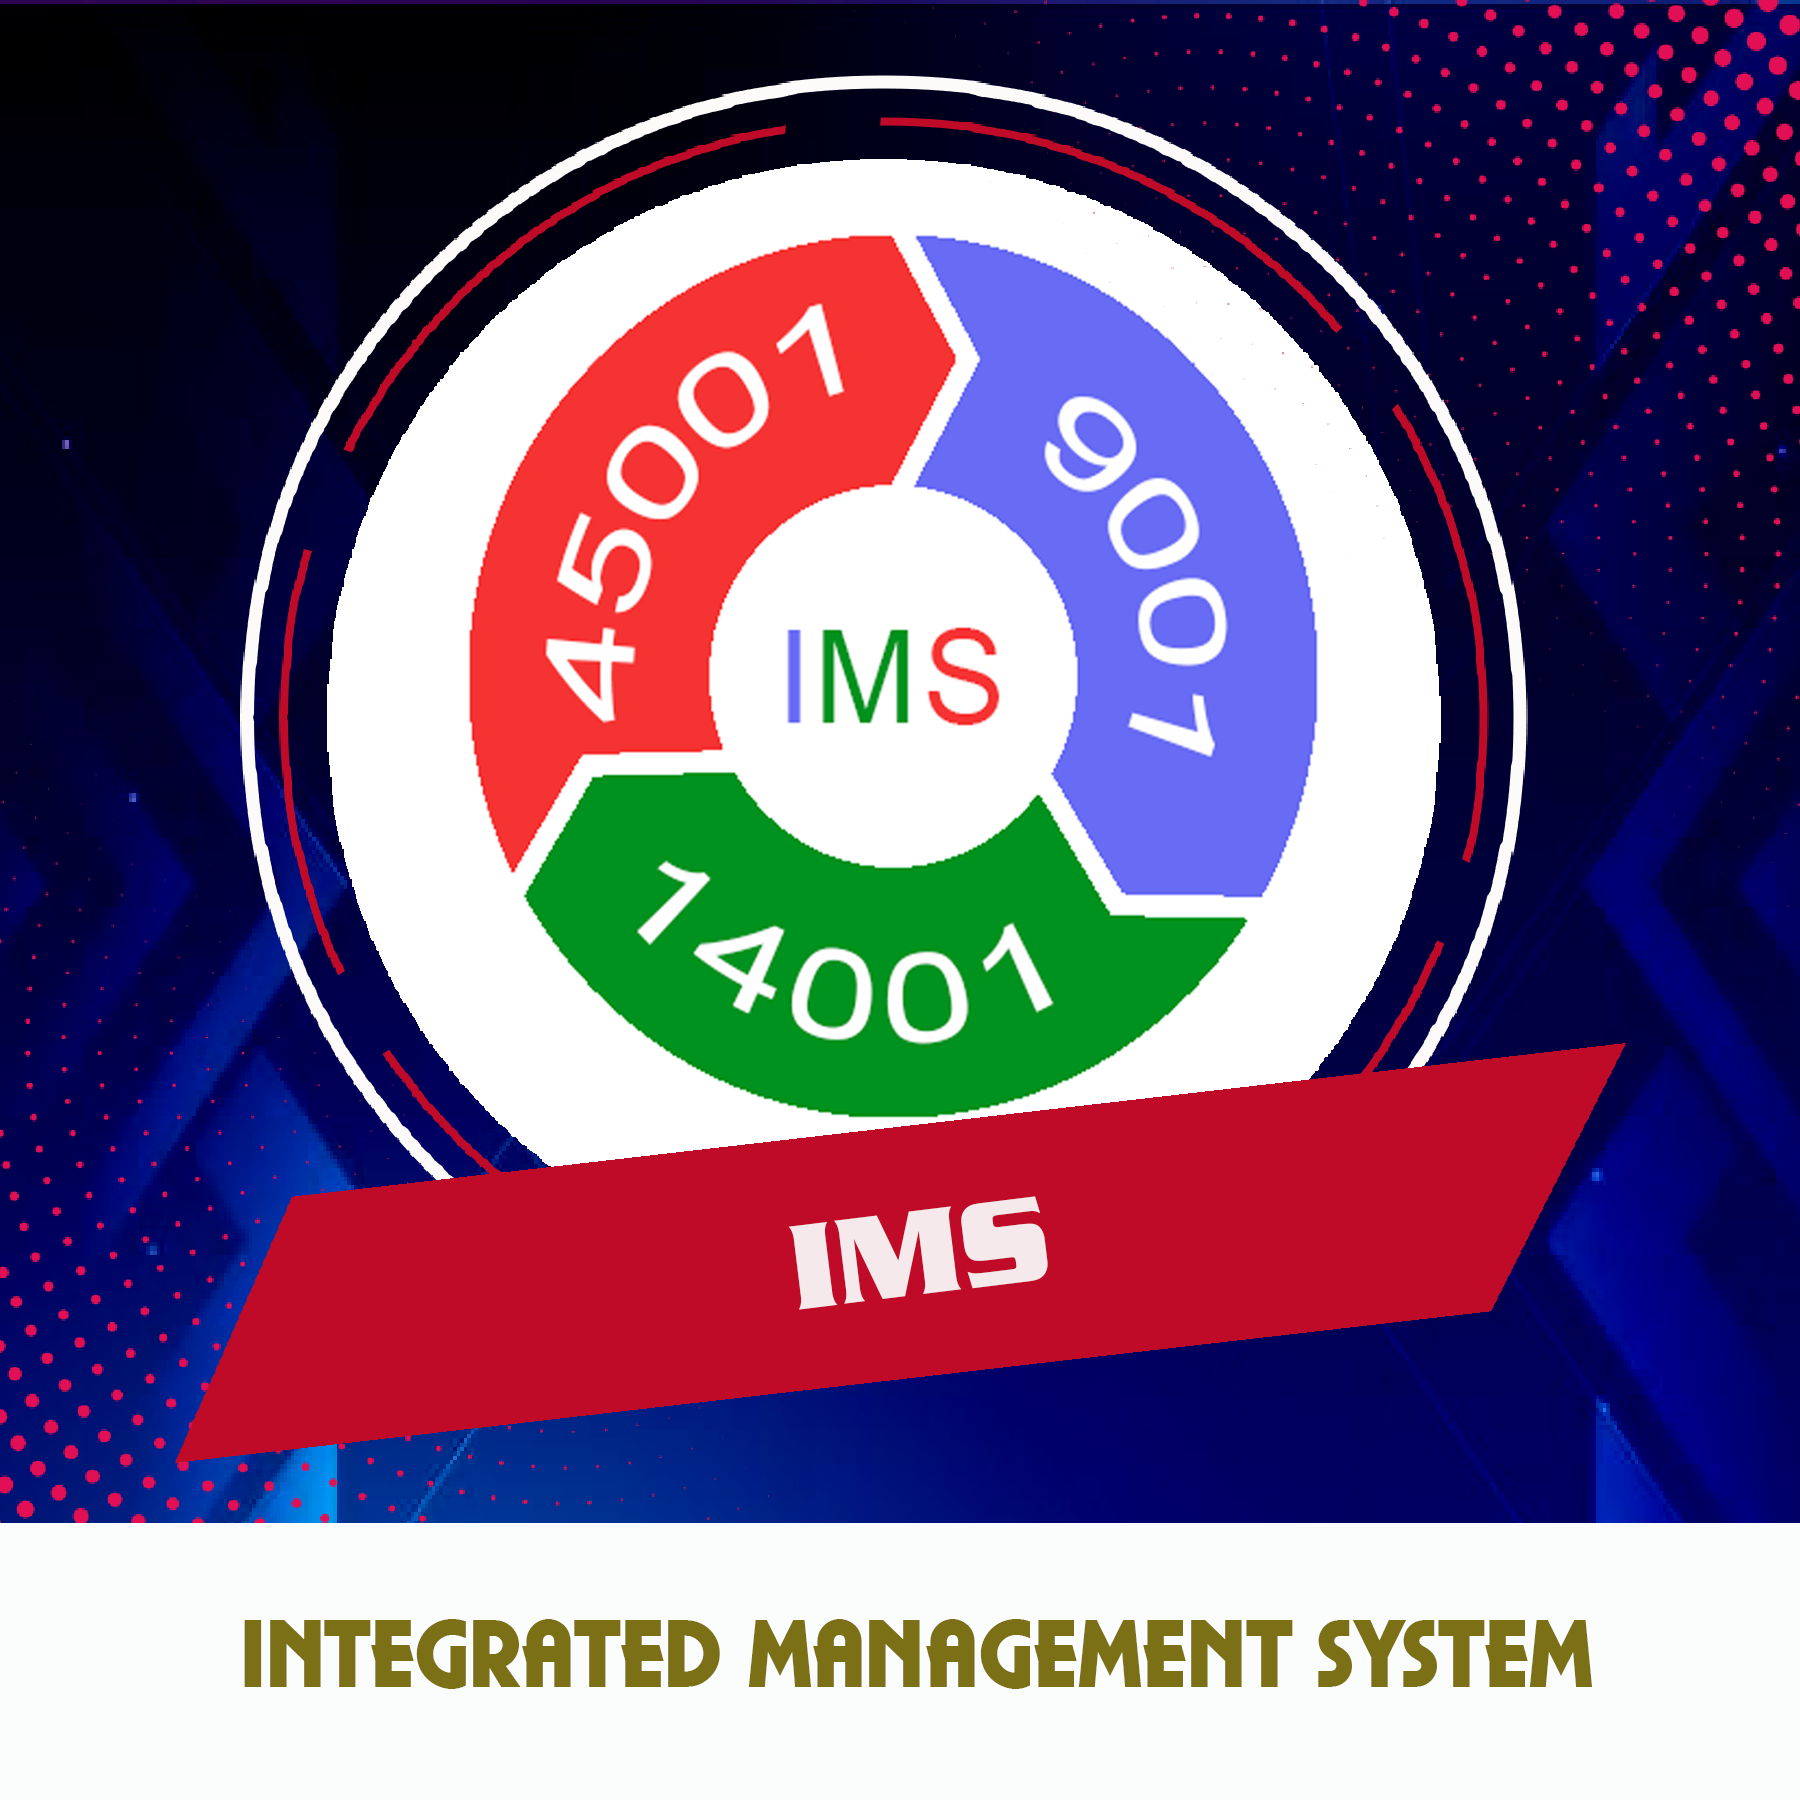 Common Benefits of an Integrated Management System: